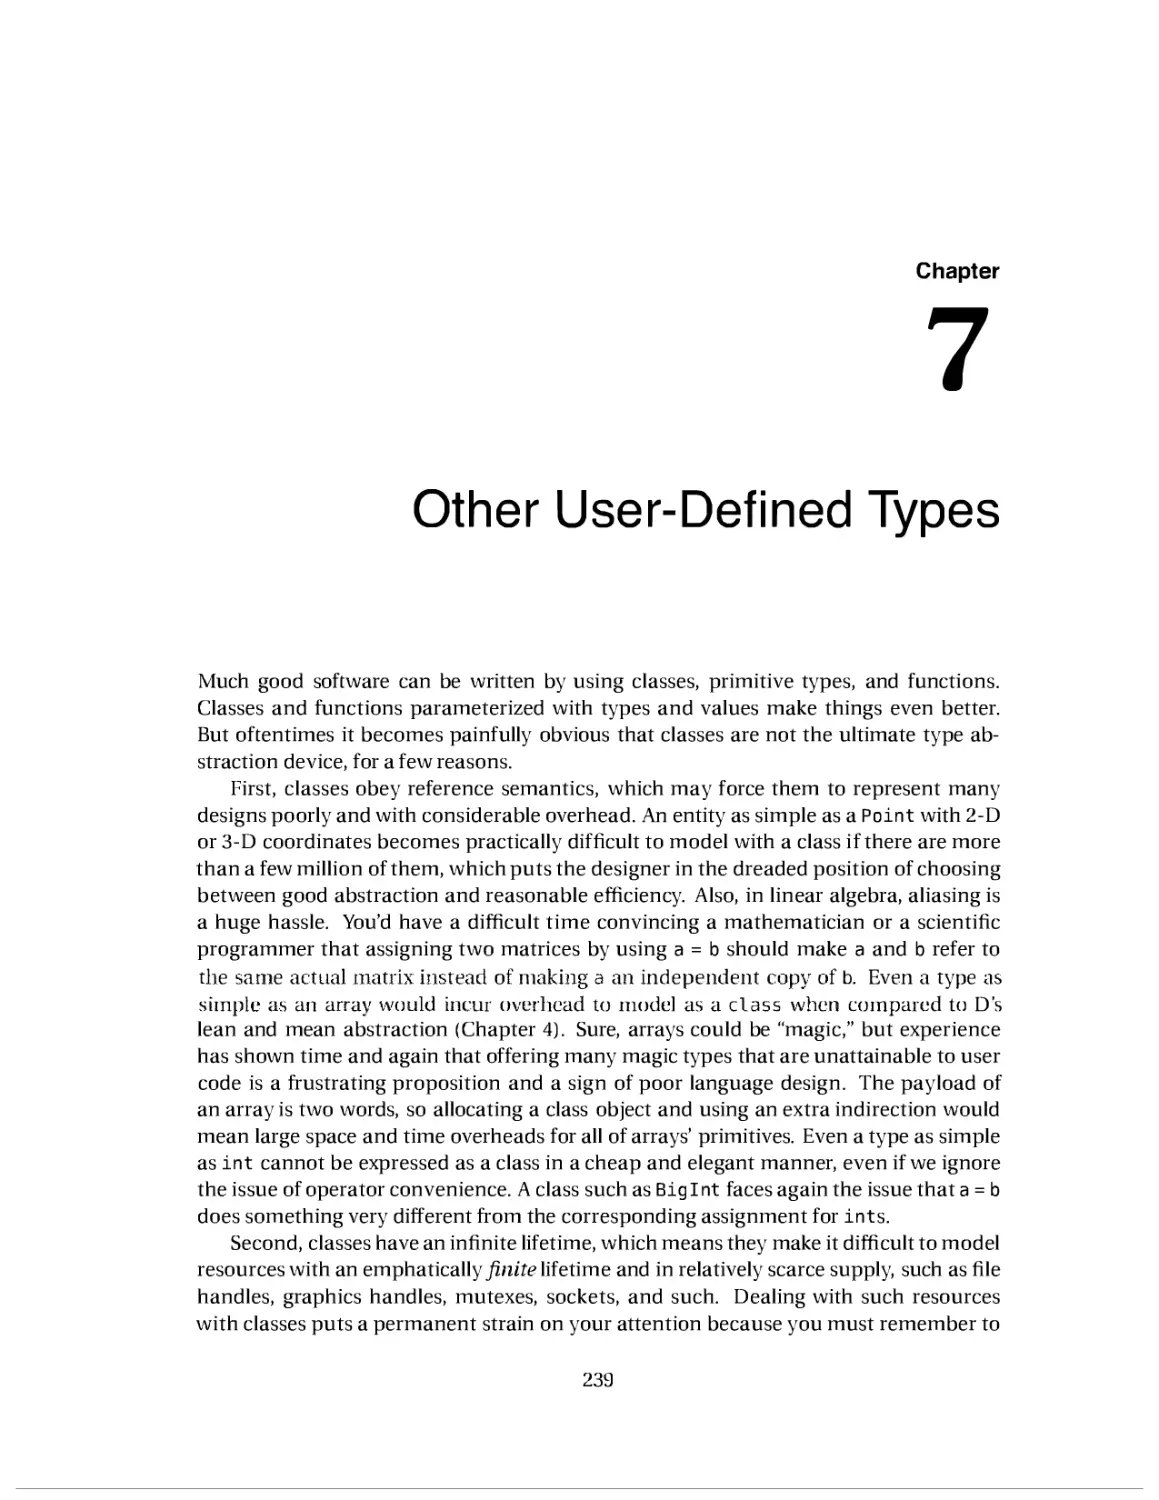 7. Other User-Defined Types